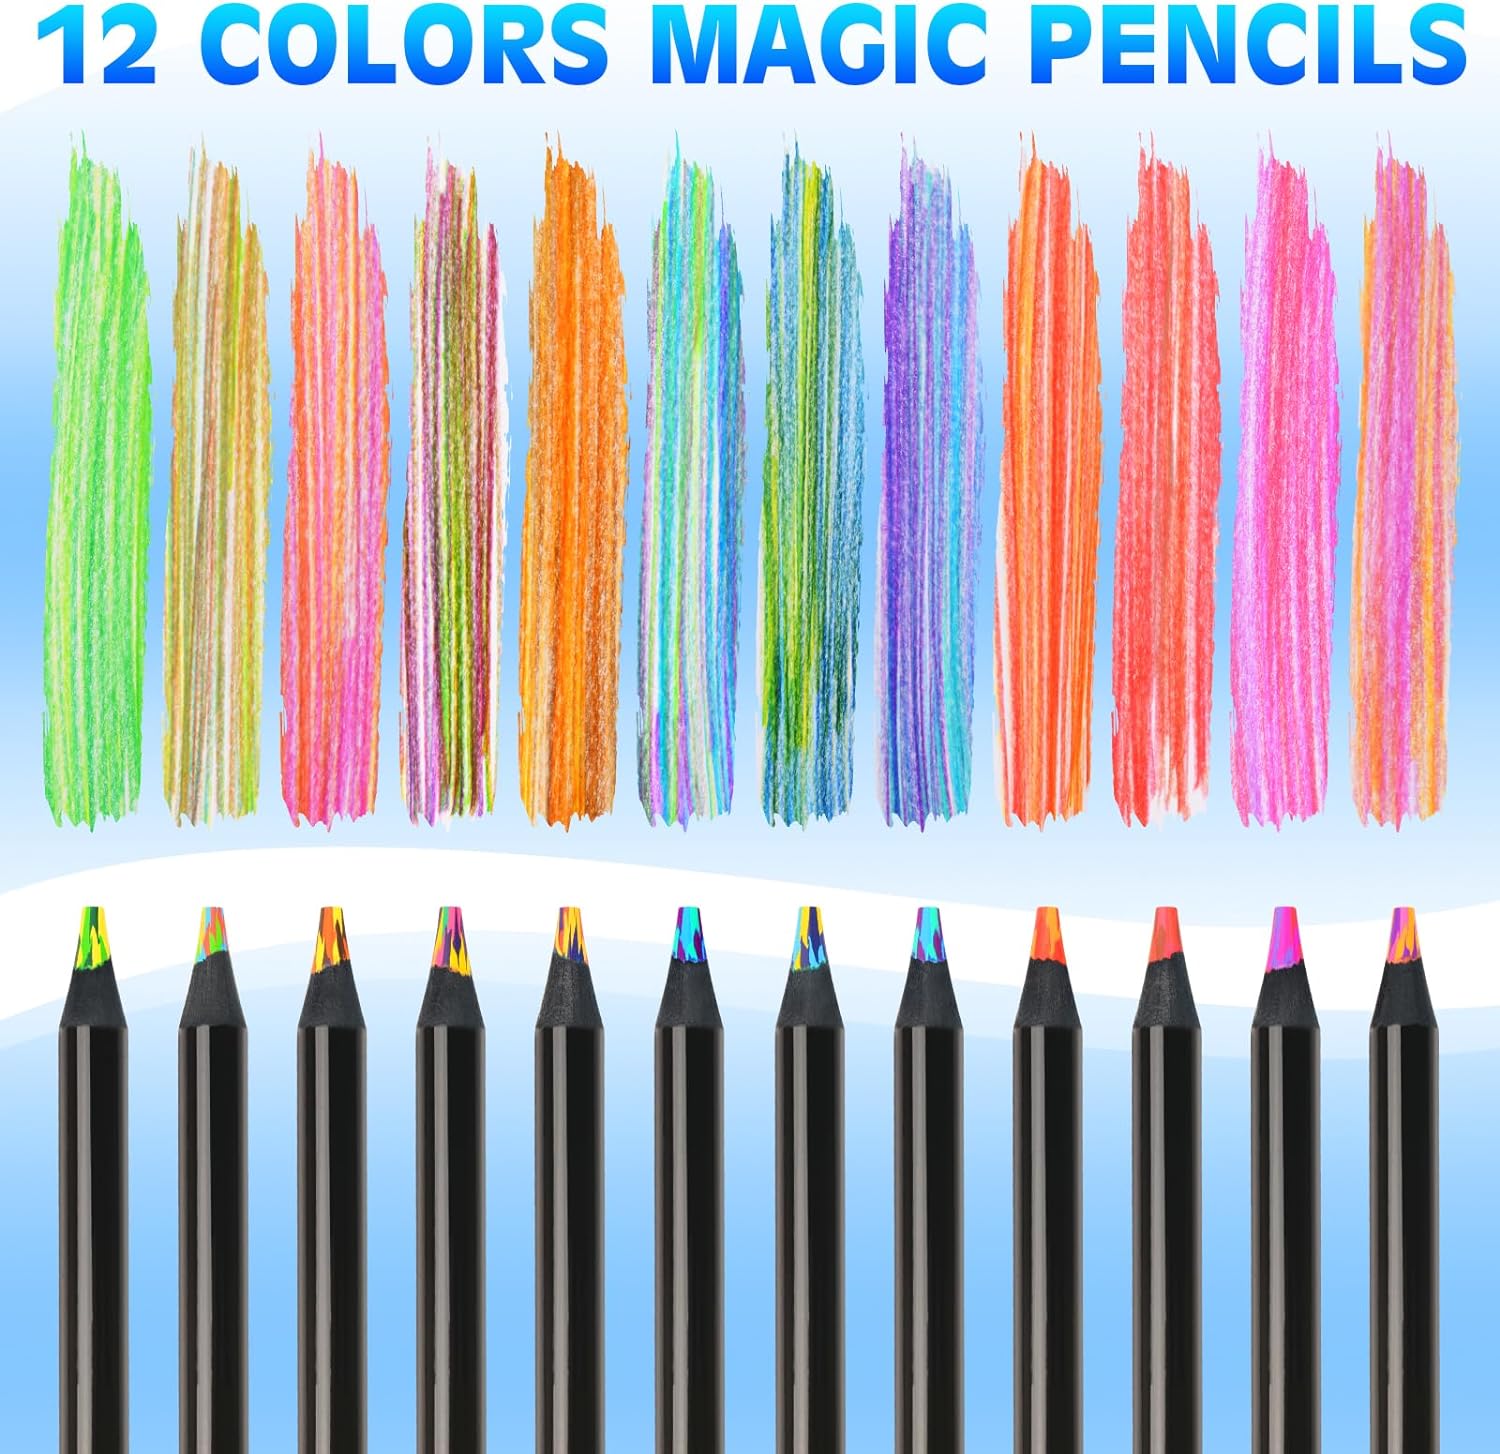 8IN1 Colored Art Pencils for Adult Coloring Drawing,12 Pack